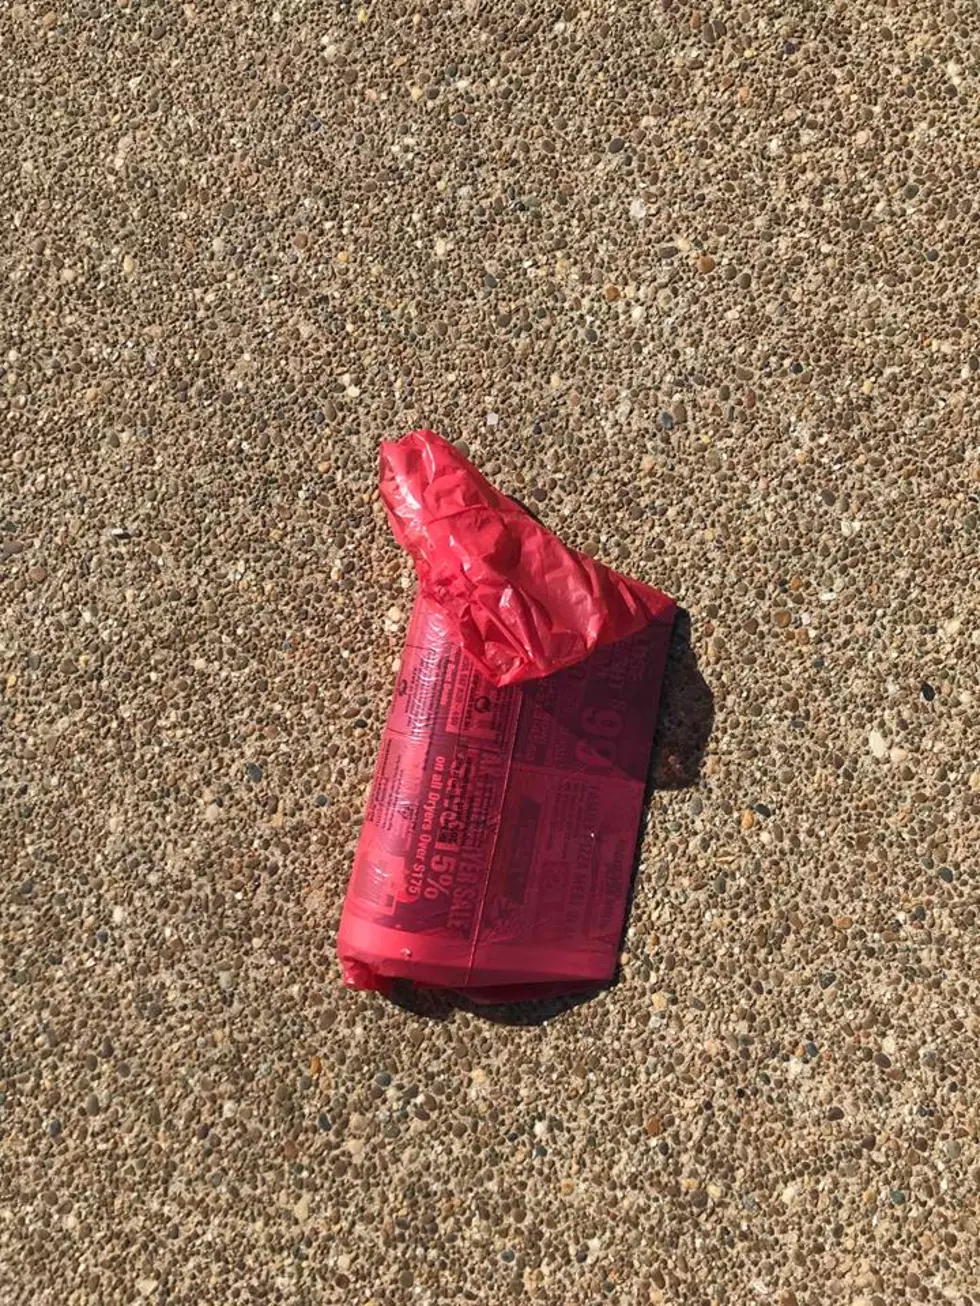 How To Unsubscribe From Red Bags In Your Driveway